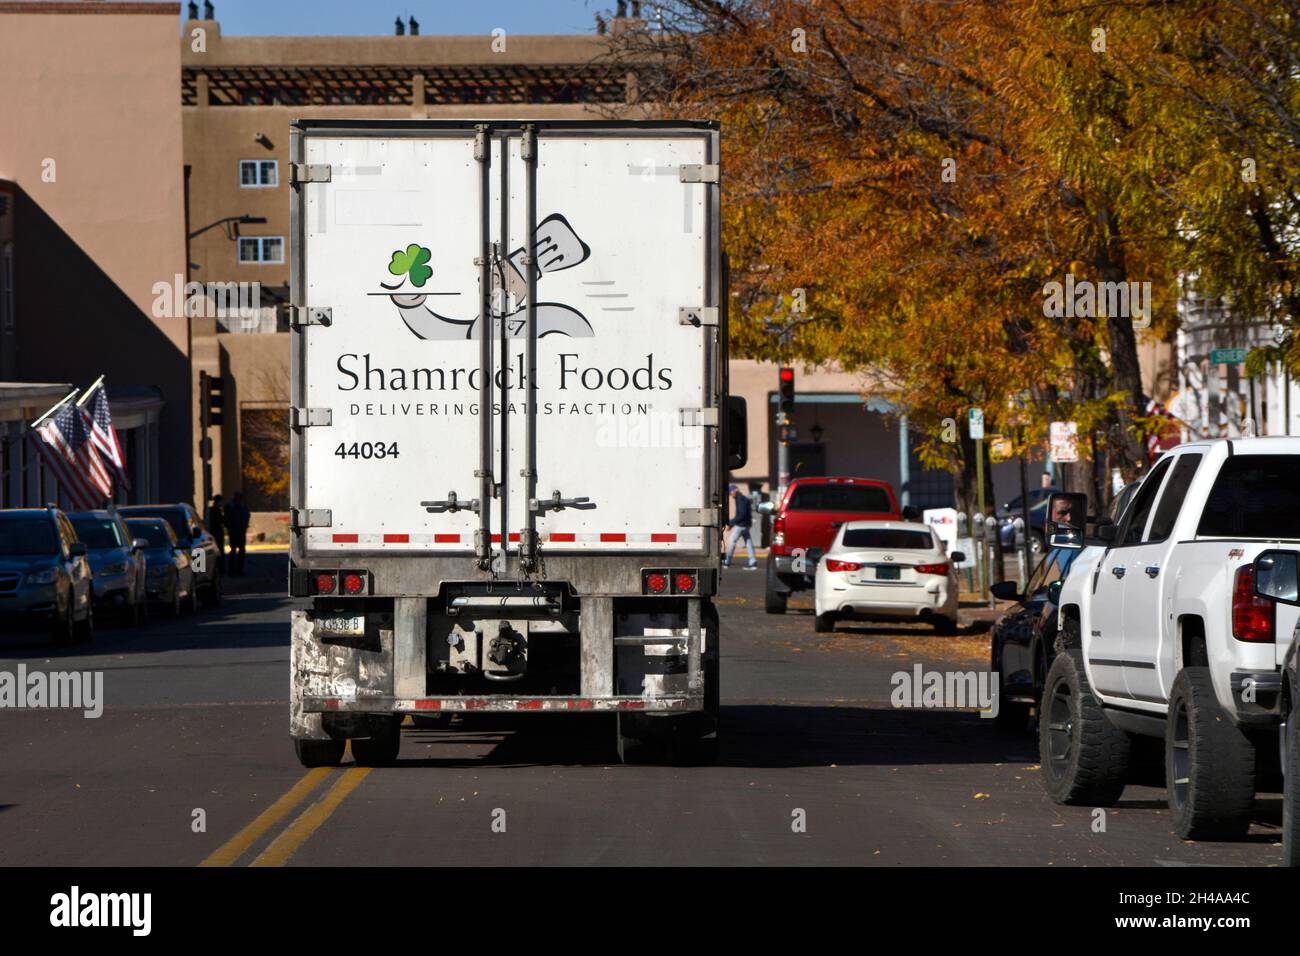 A Shamrock Foods Company truck delivers produce and other food items to restaurants in Santa Fe, New Mexico. Stock Photo